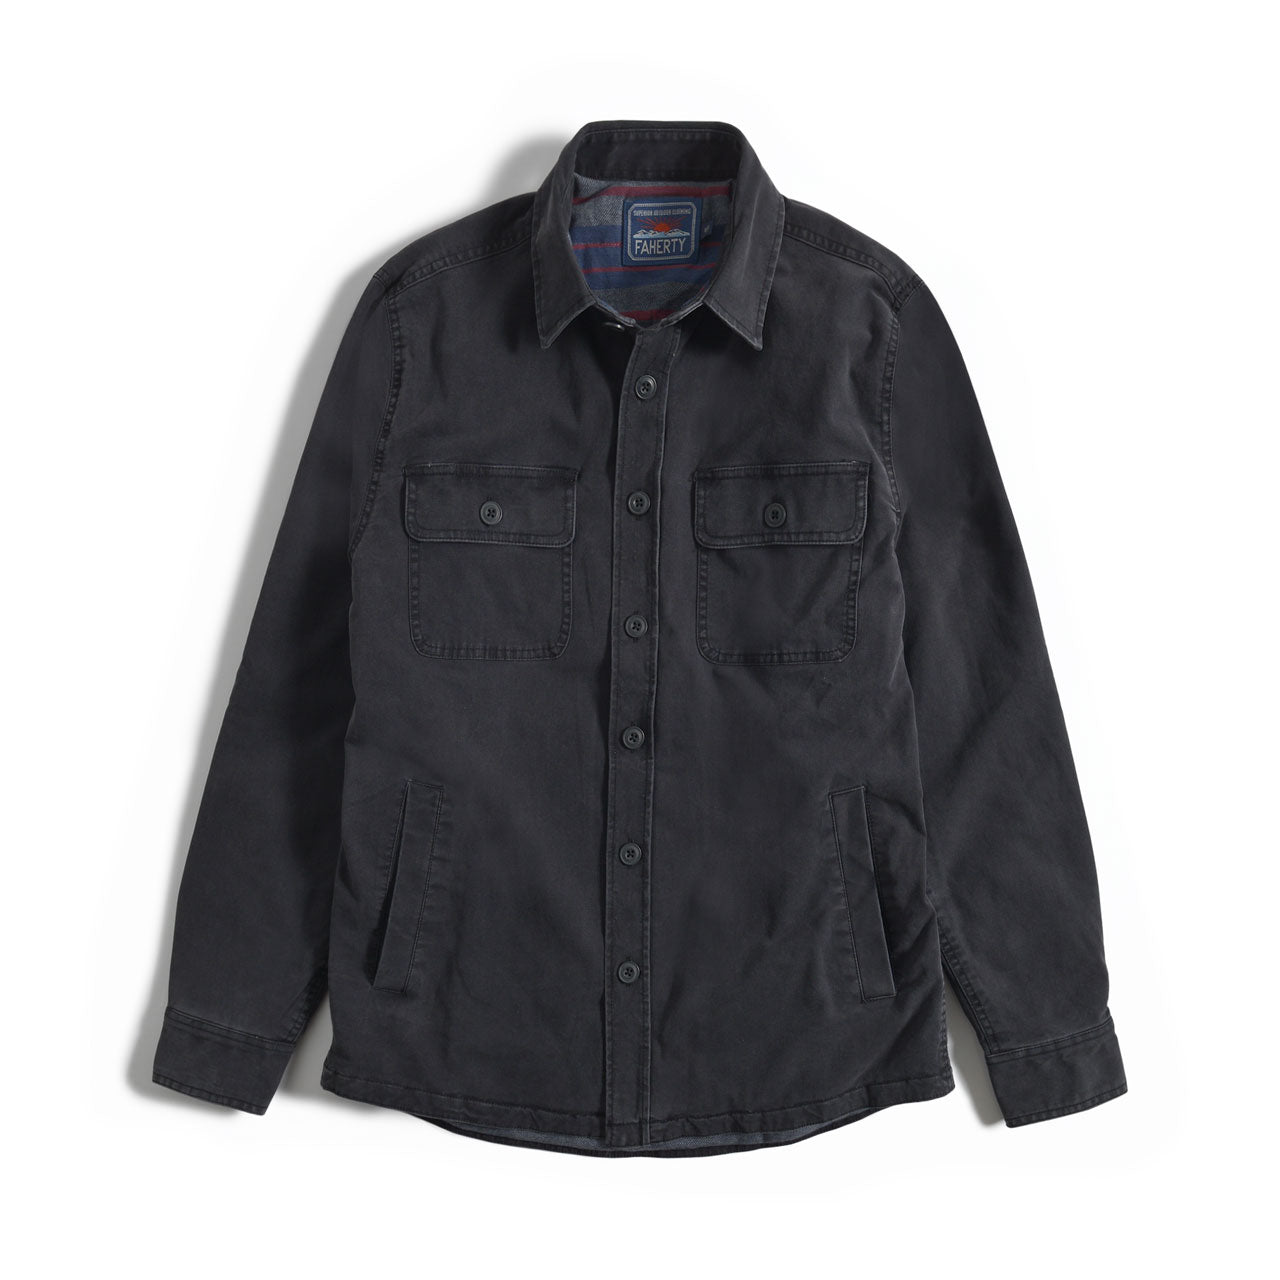 Faherty Stretch Blanket Lined CPO Shirt Jacket